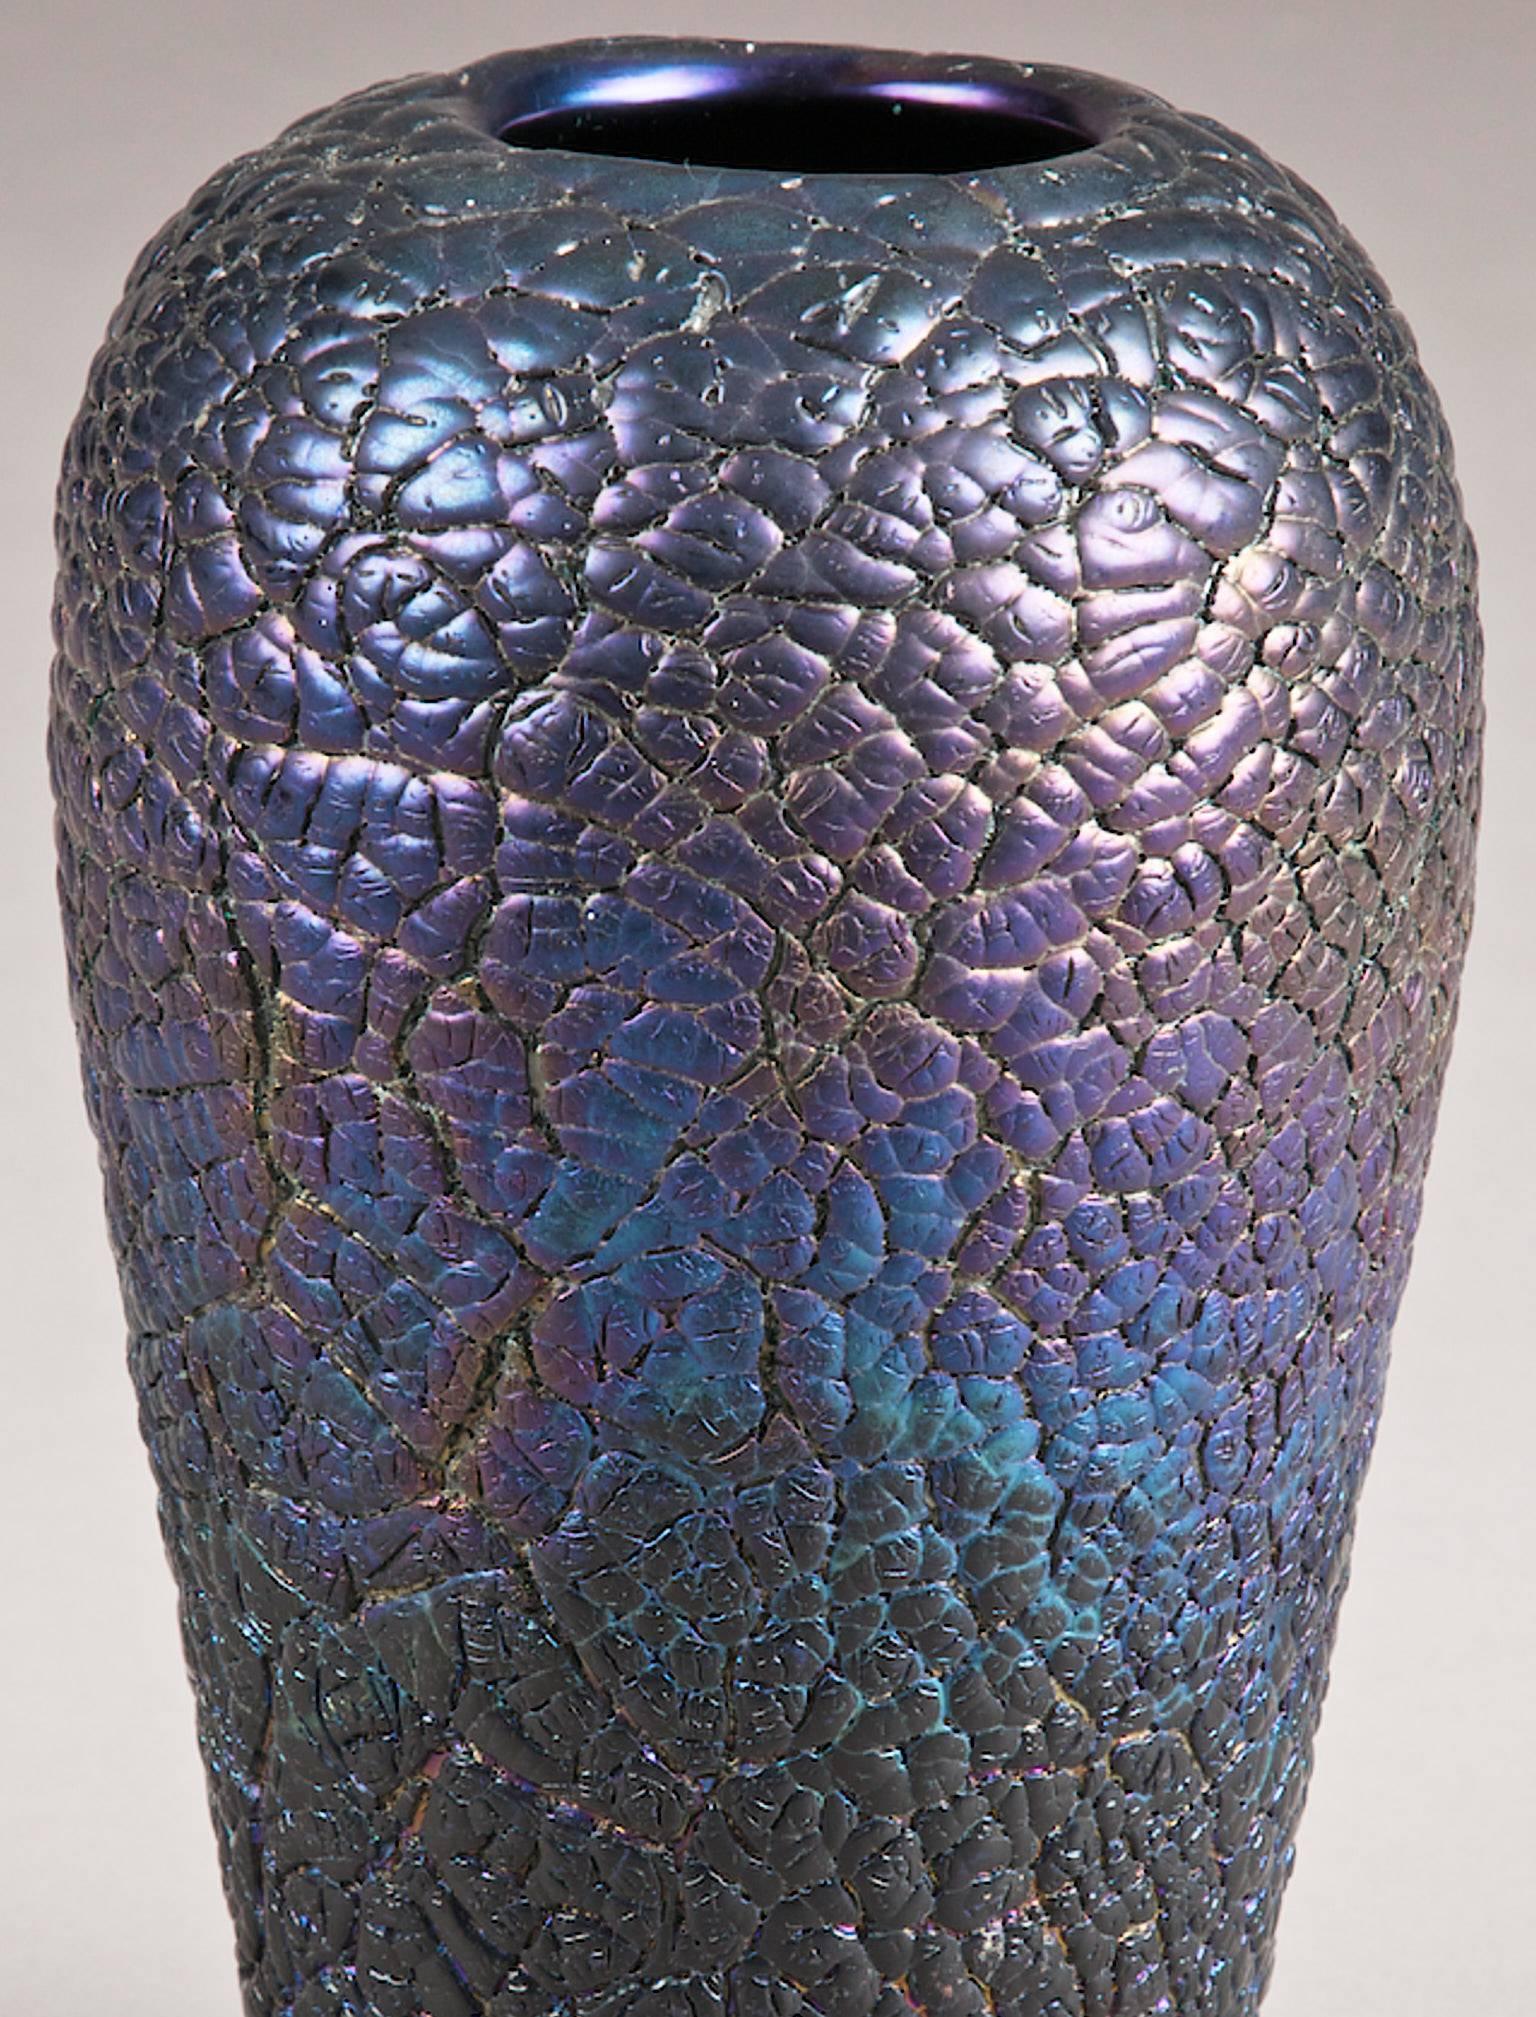 Late 19th century art glass vase by Thomas Webb, circa 1880-1890

This form of glass vase was created from Webb's experimentation with recreating ancient, archaeological find, Greco / Roman iridescent glass, that changed colour as light struck and